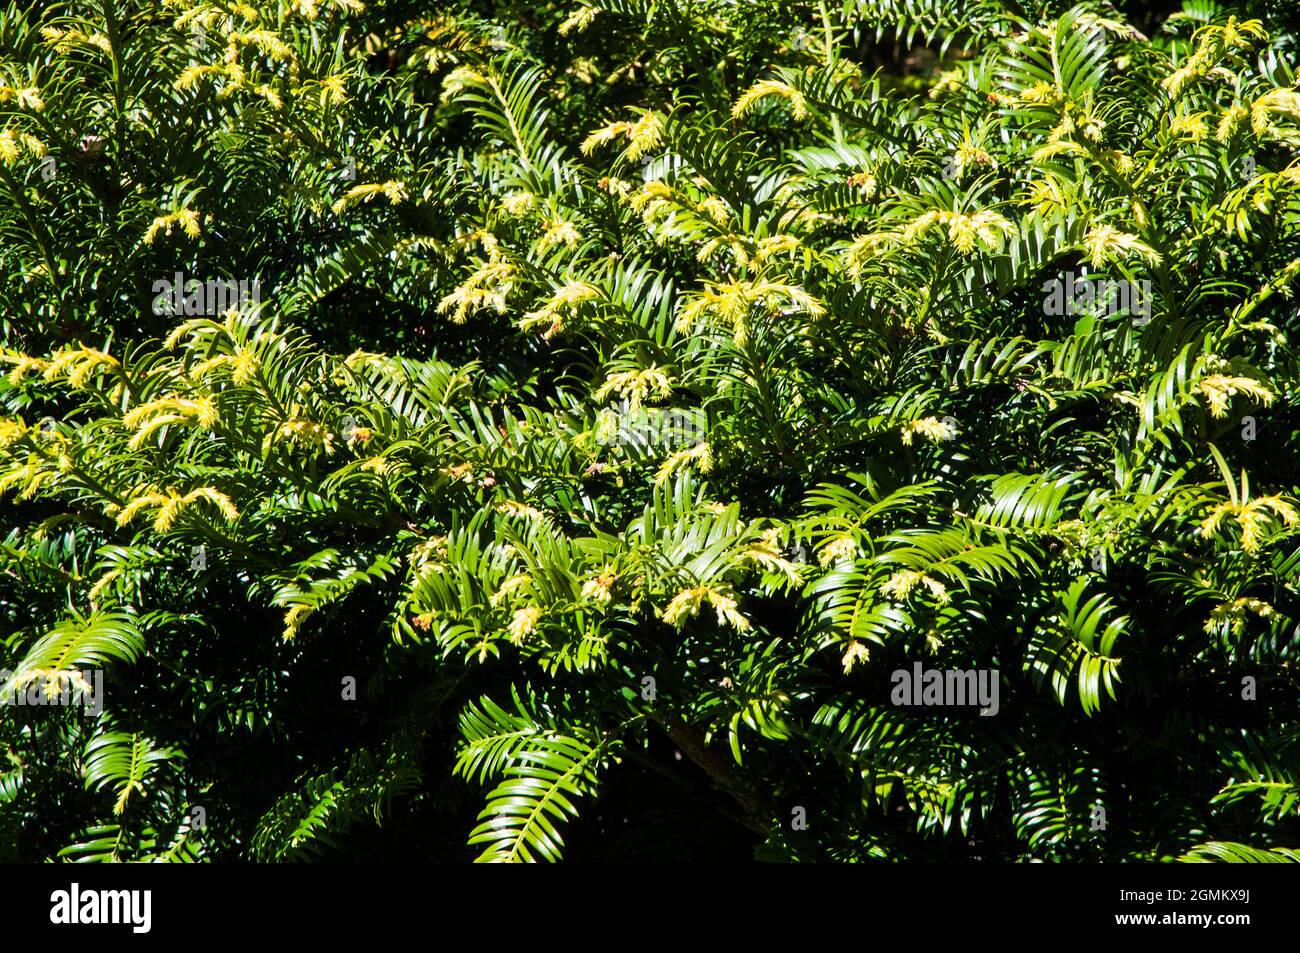 Taxus baccata Yew with bright yellow new growth other names are Common Yew and English Yew a long living evergreen tree that is fully hardy Stock Photo